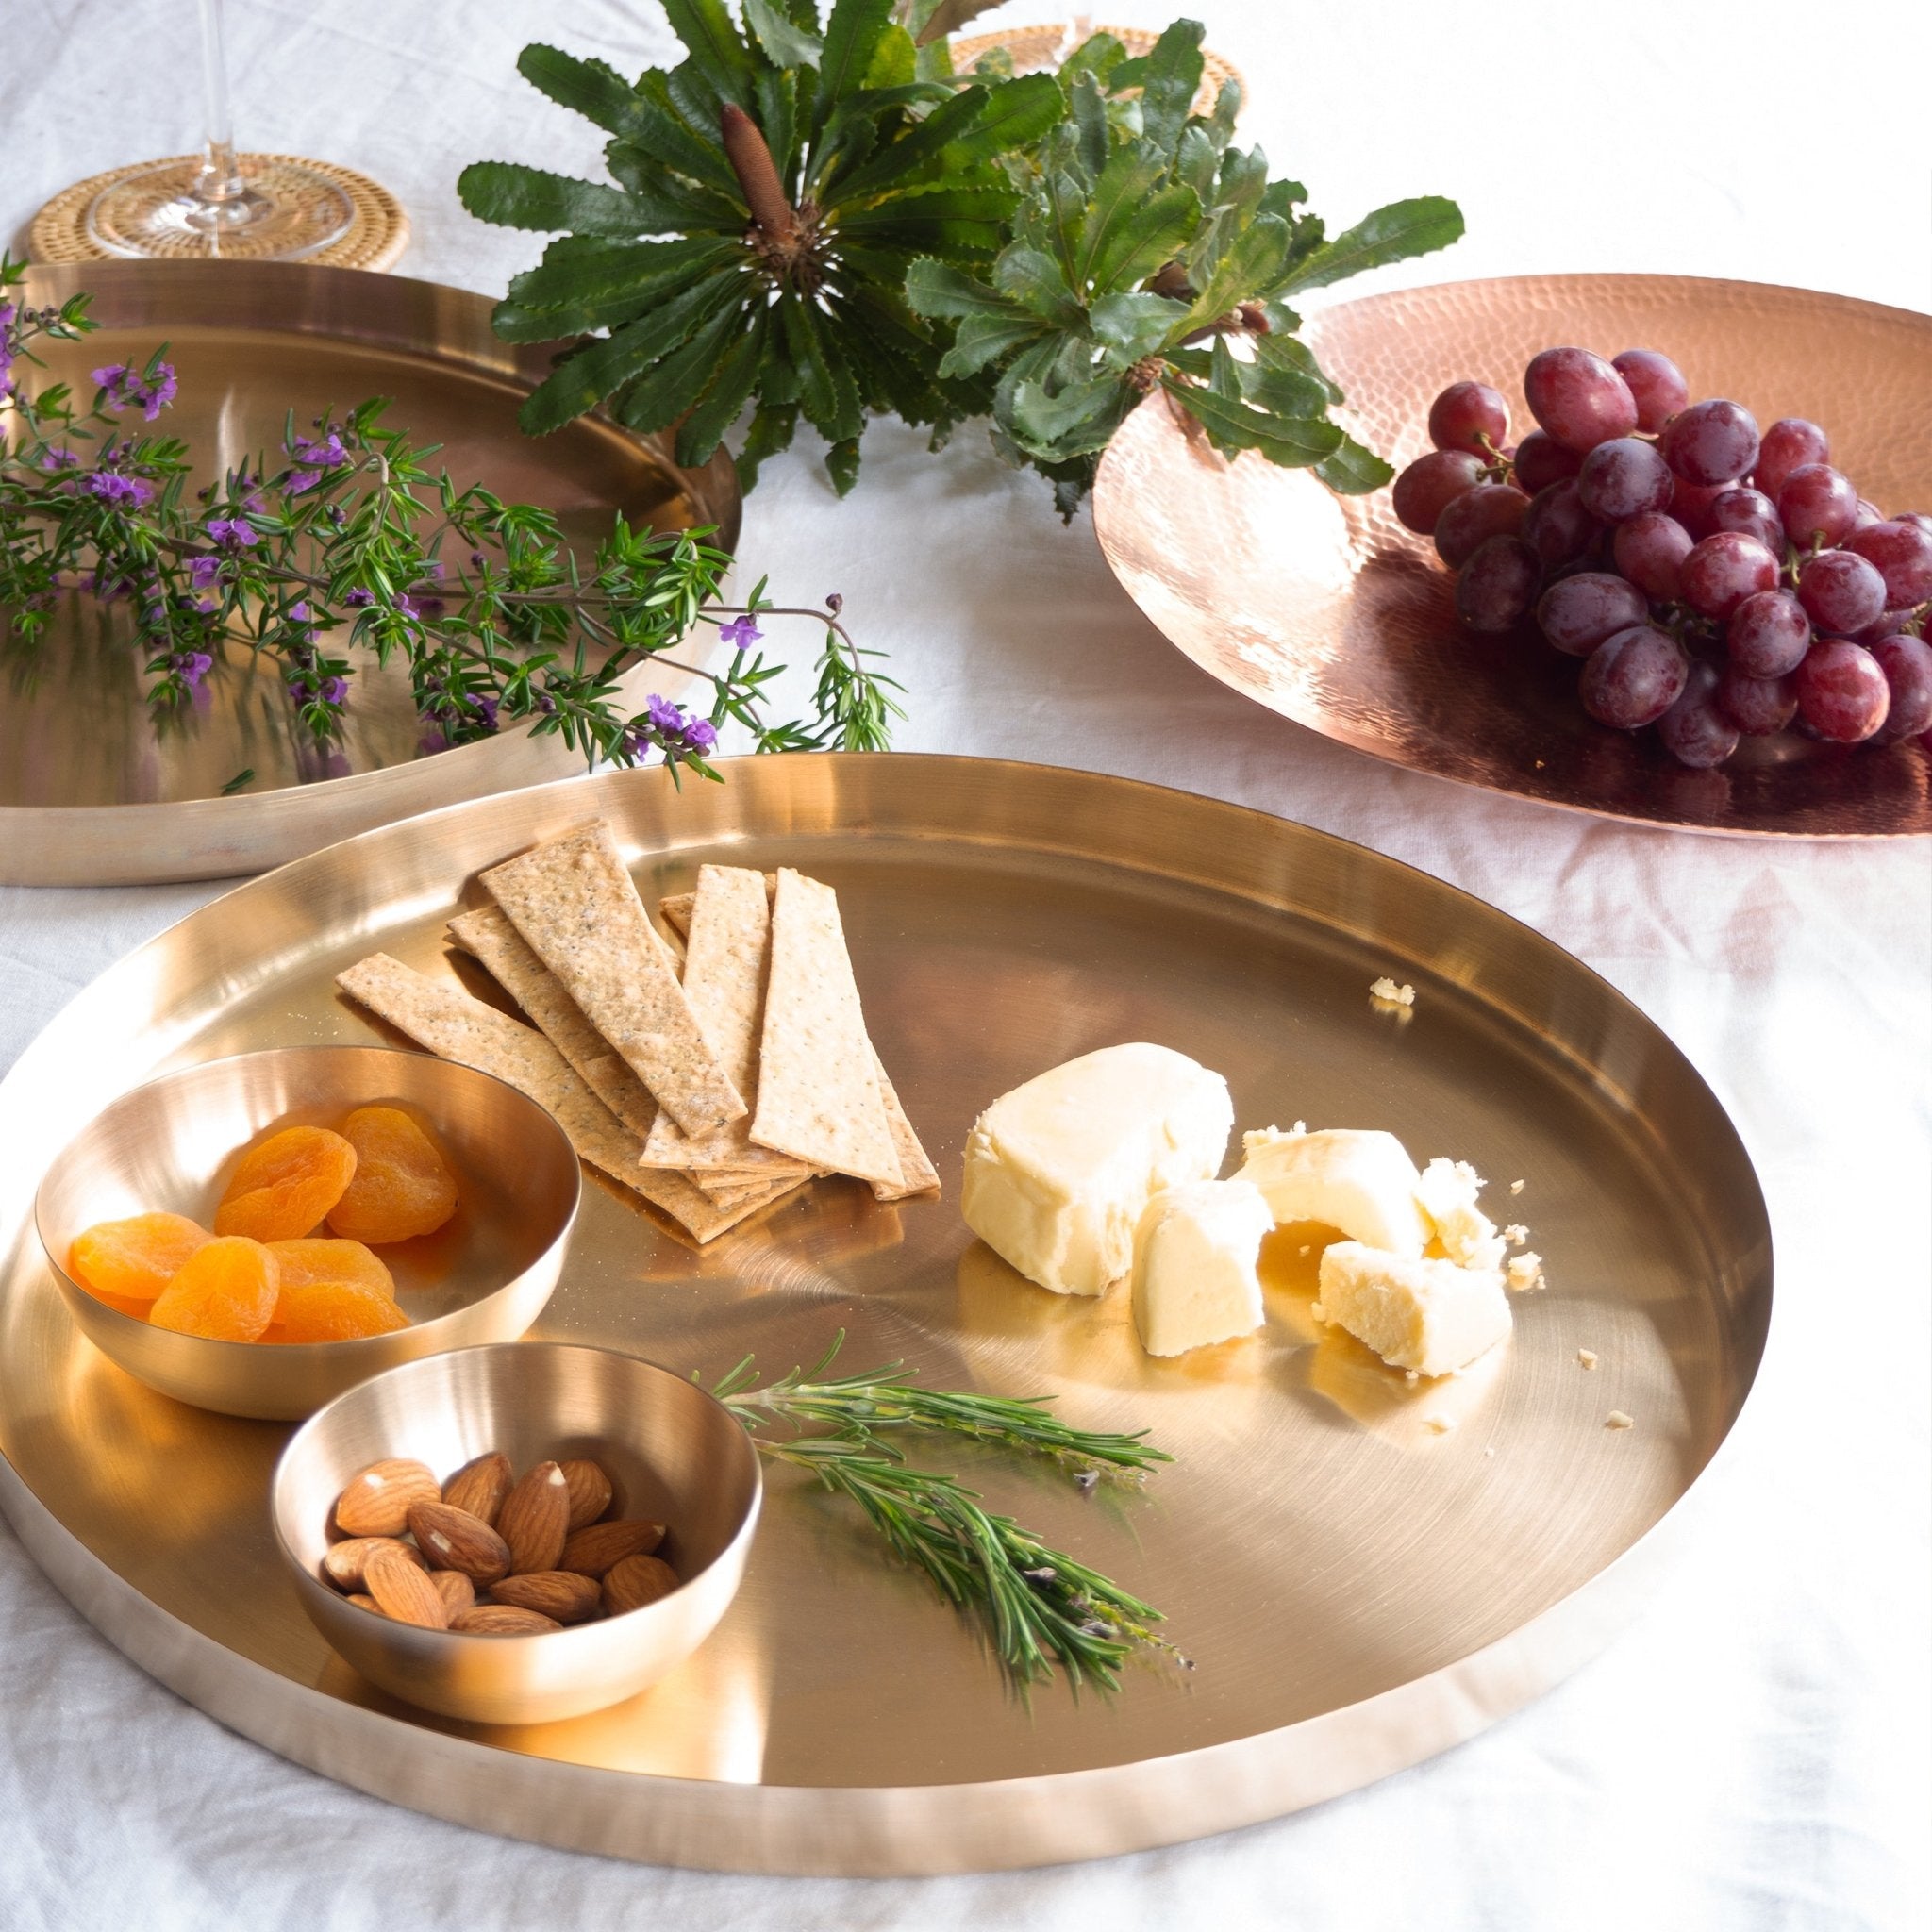 Two bronze kansa platters, two bronze kansa snack bowls and hammered copper bowl with grapes, cheese, biscuits, nuts, fruit and greenery